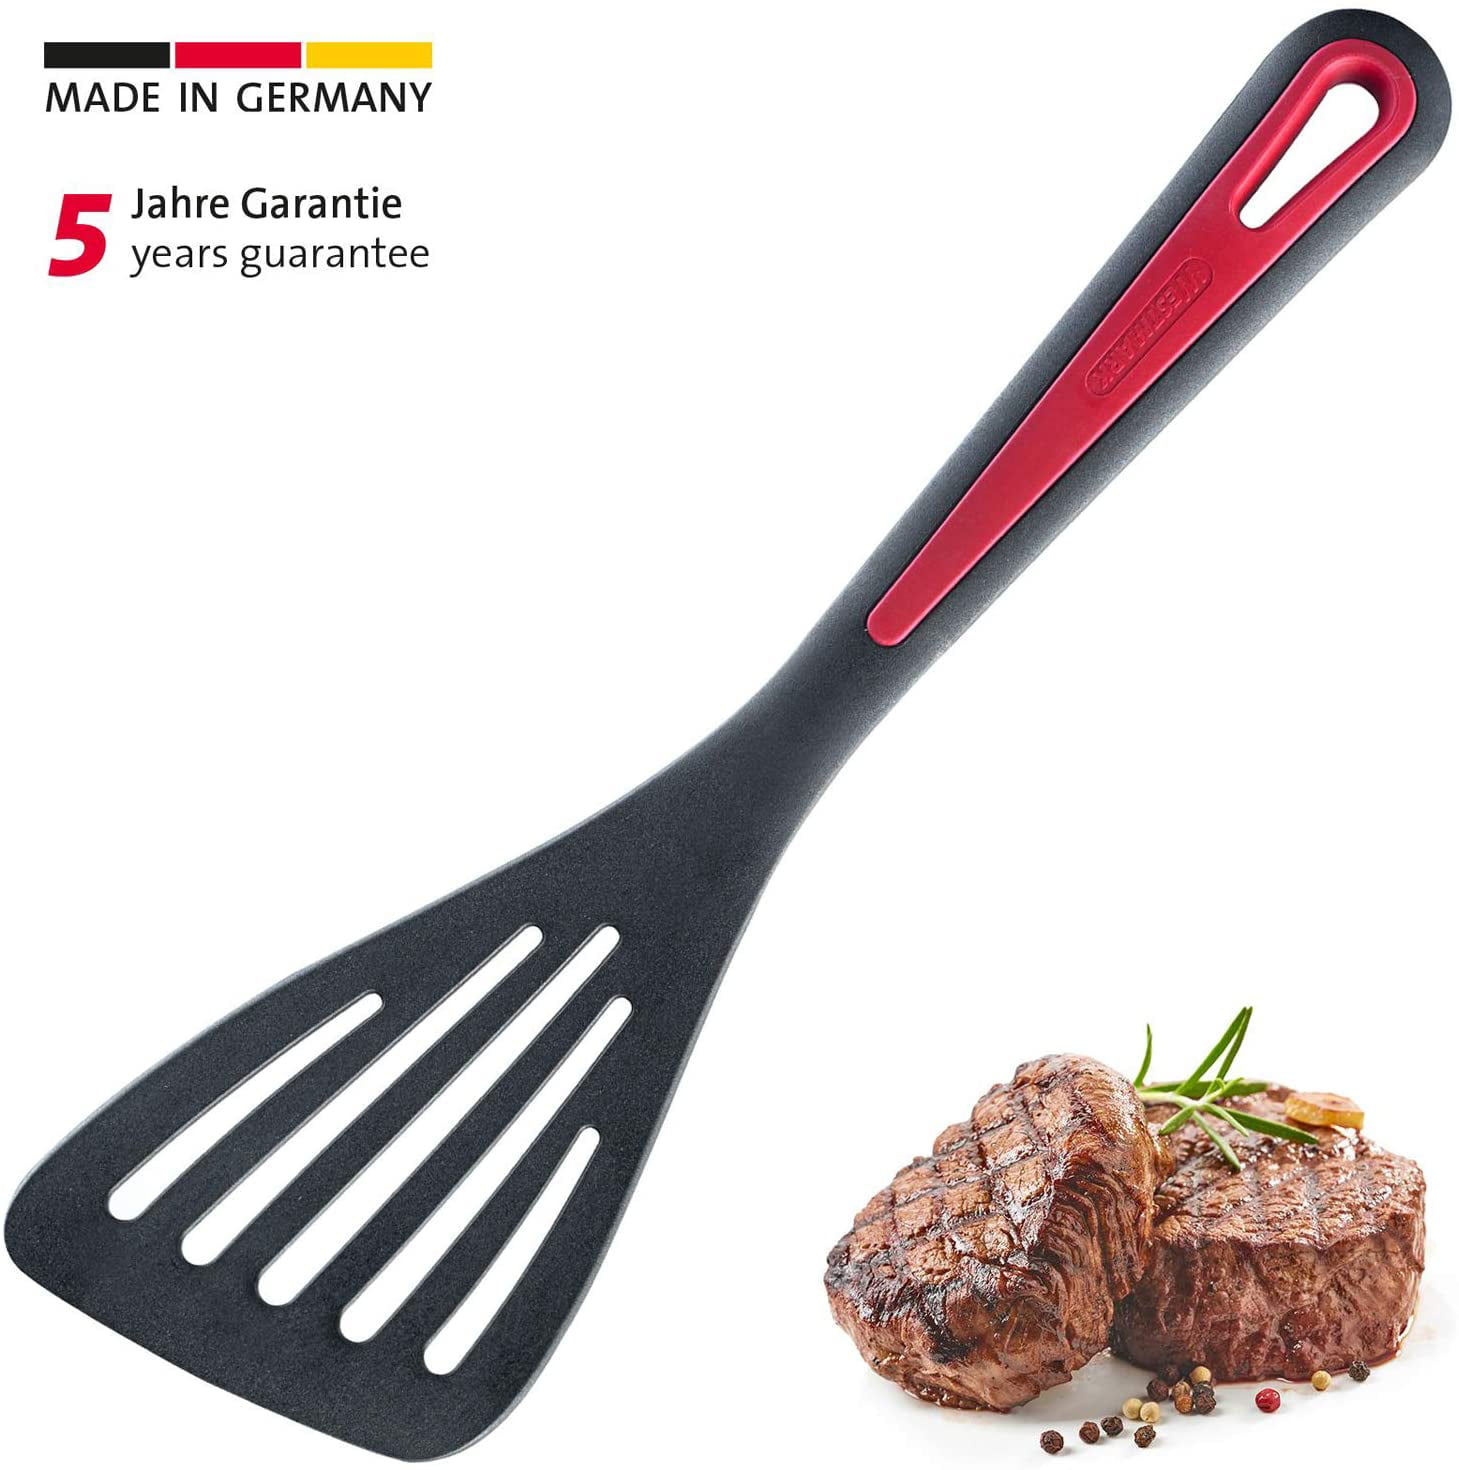 11.8-inch Red/Black Westmark Germany Non-Stick Thermoplastic Spatula 